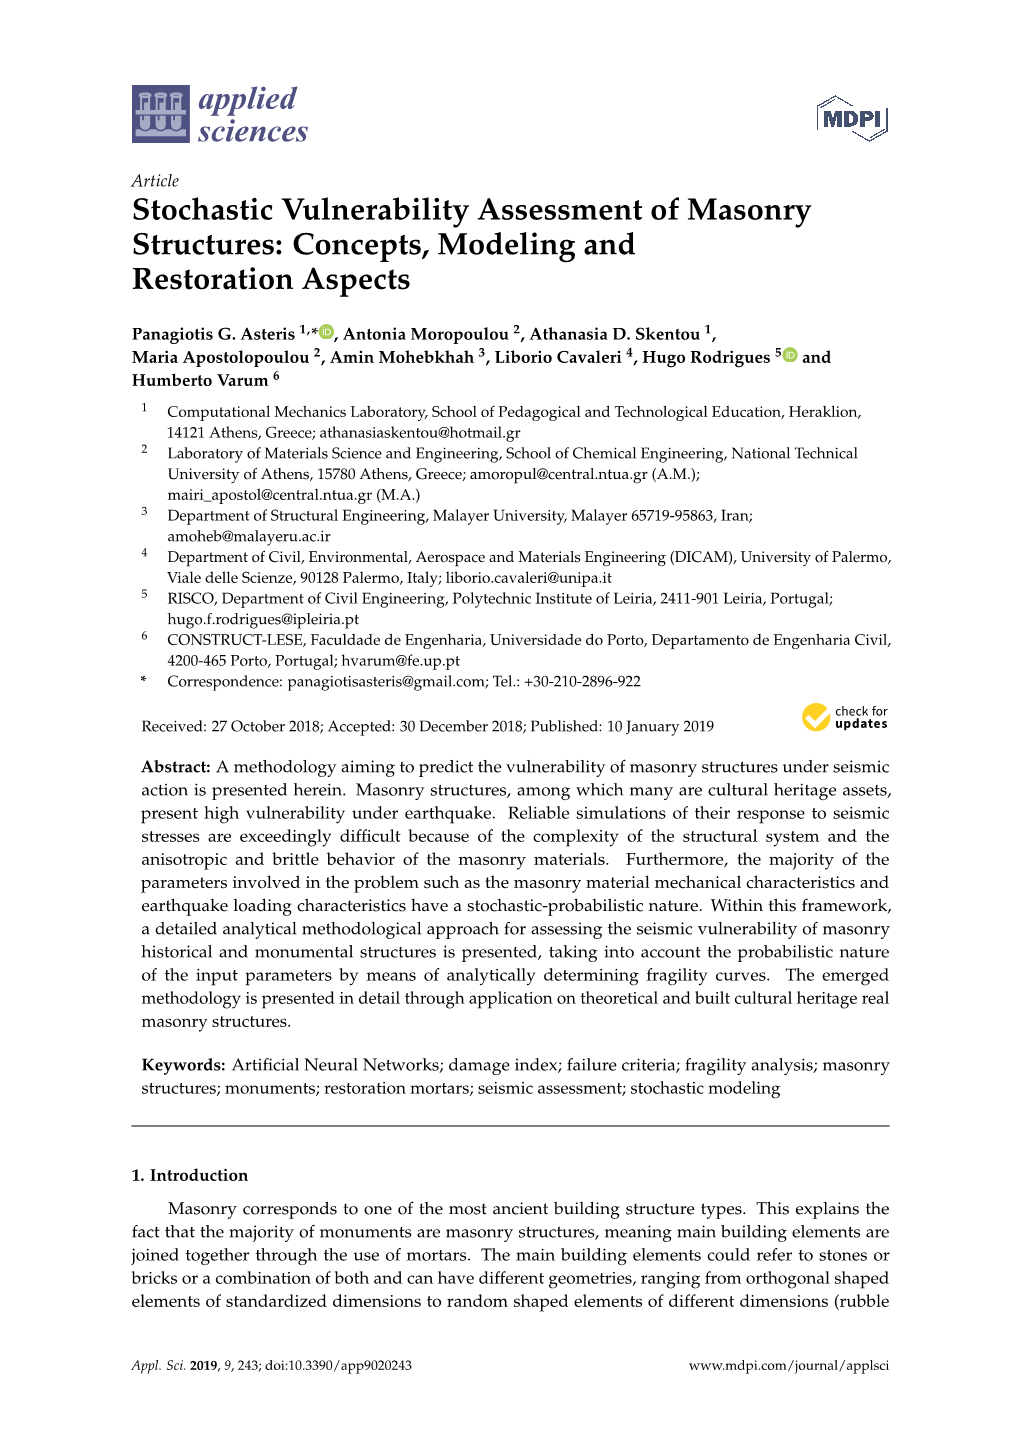 Stochastic Vulnerability Assessment of Masonry Structures: Concepts, Modeling and Restoration Aspects